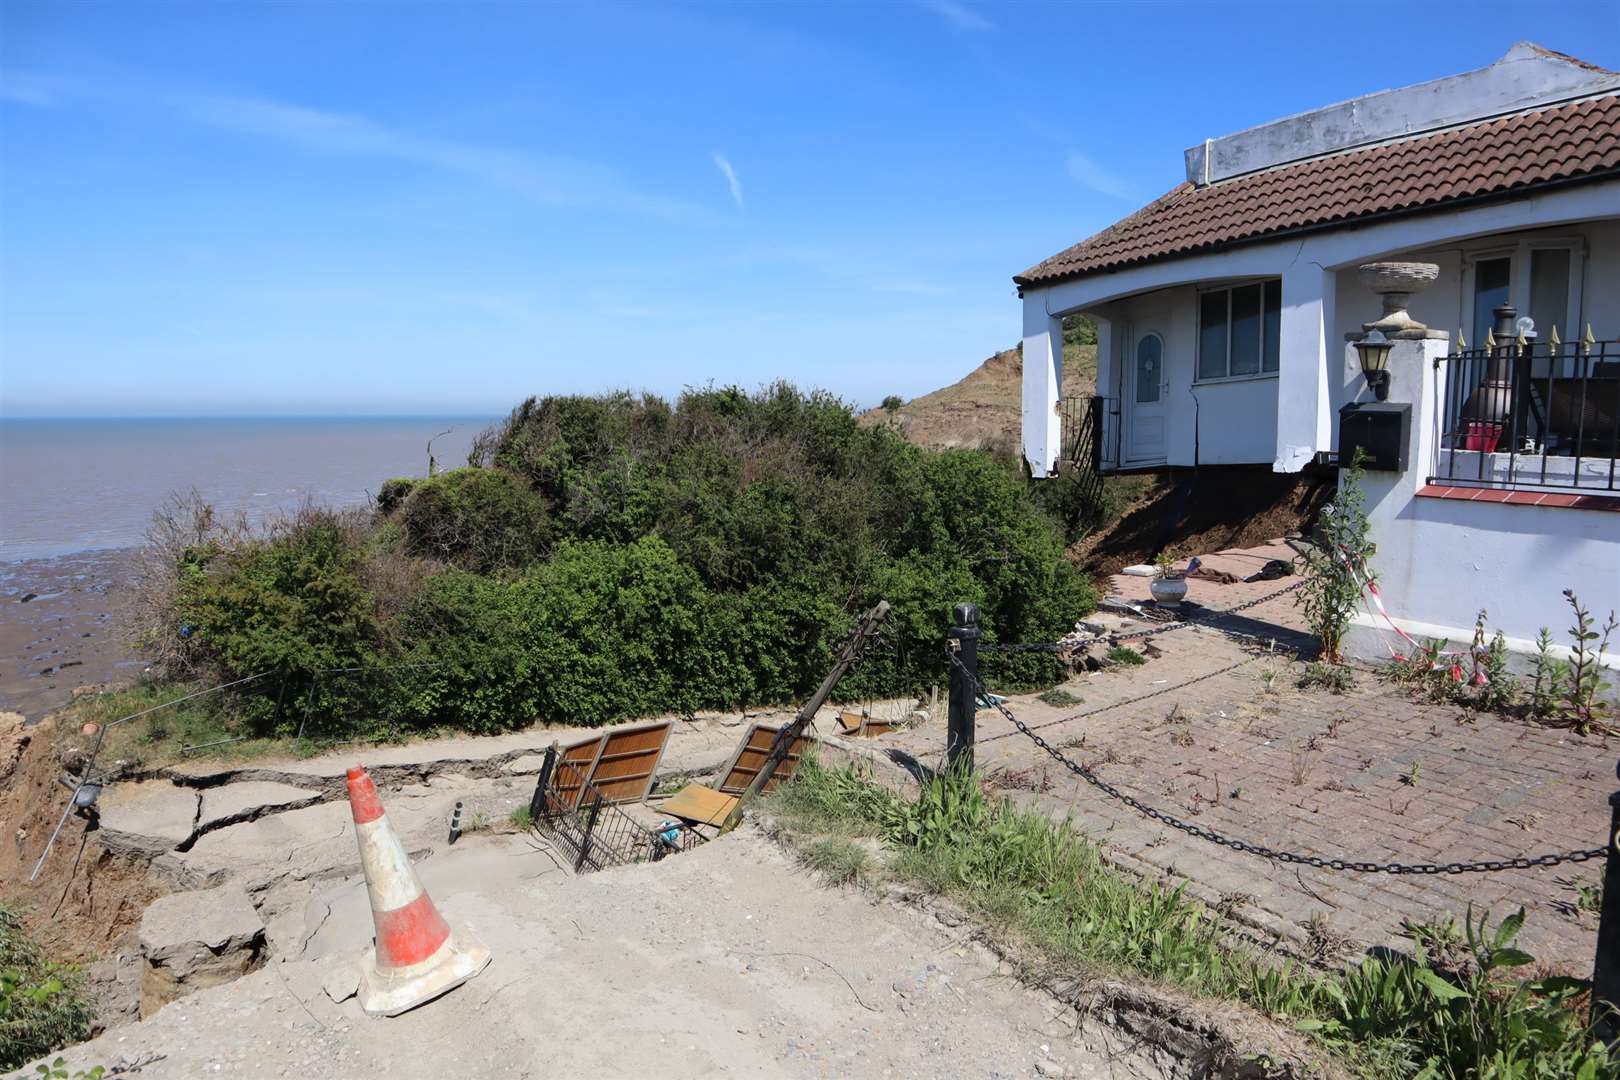 Emma Tullett's home at Eastchurch before it slipped down the cliffs